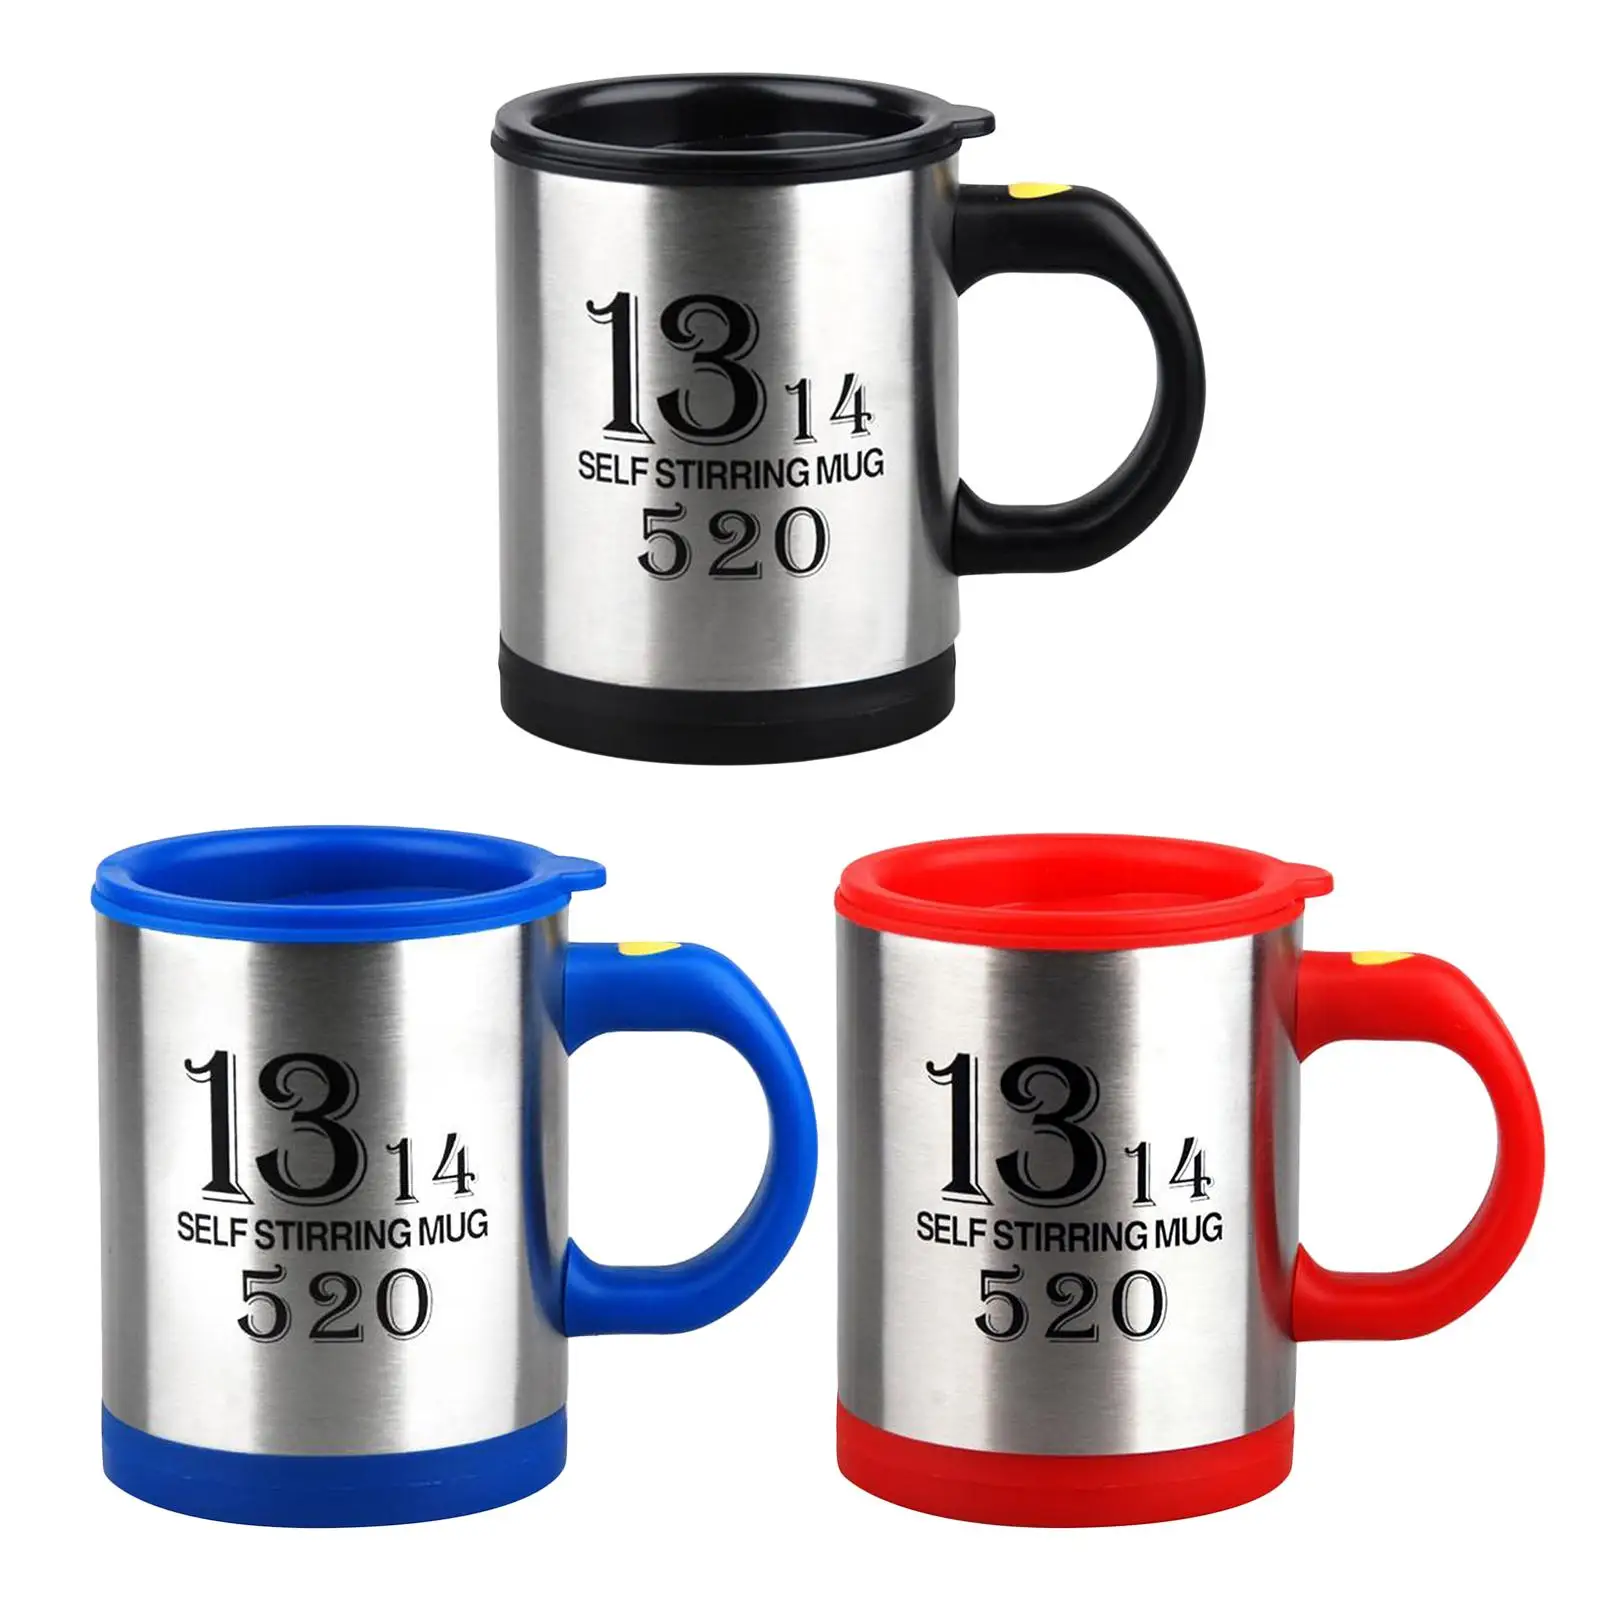 Self Stirring e Mug Stainless Steel Automatic Mixing e Cup with Lid for Home, Office, Travel 400 ml / 13.5